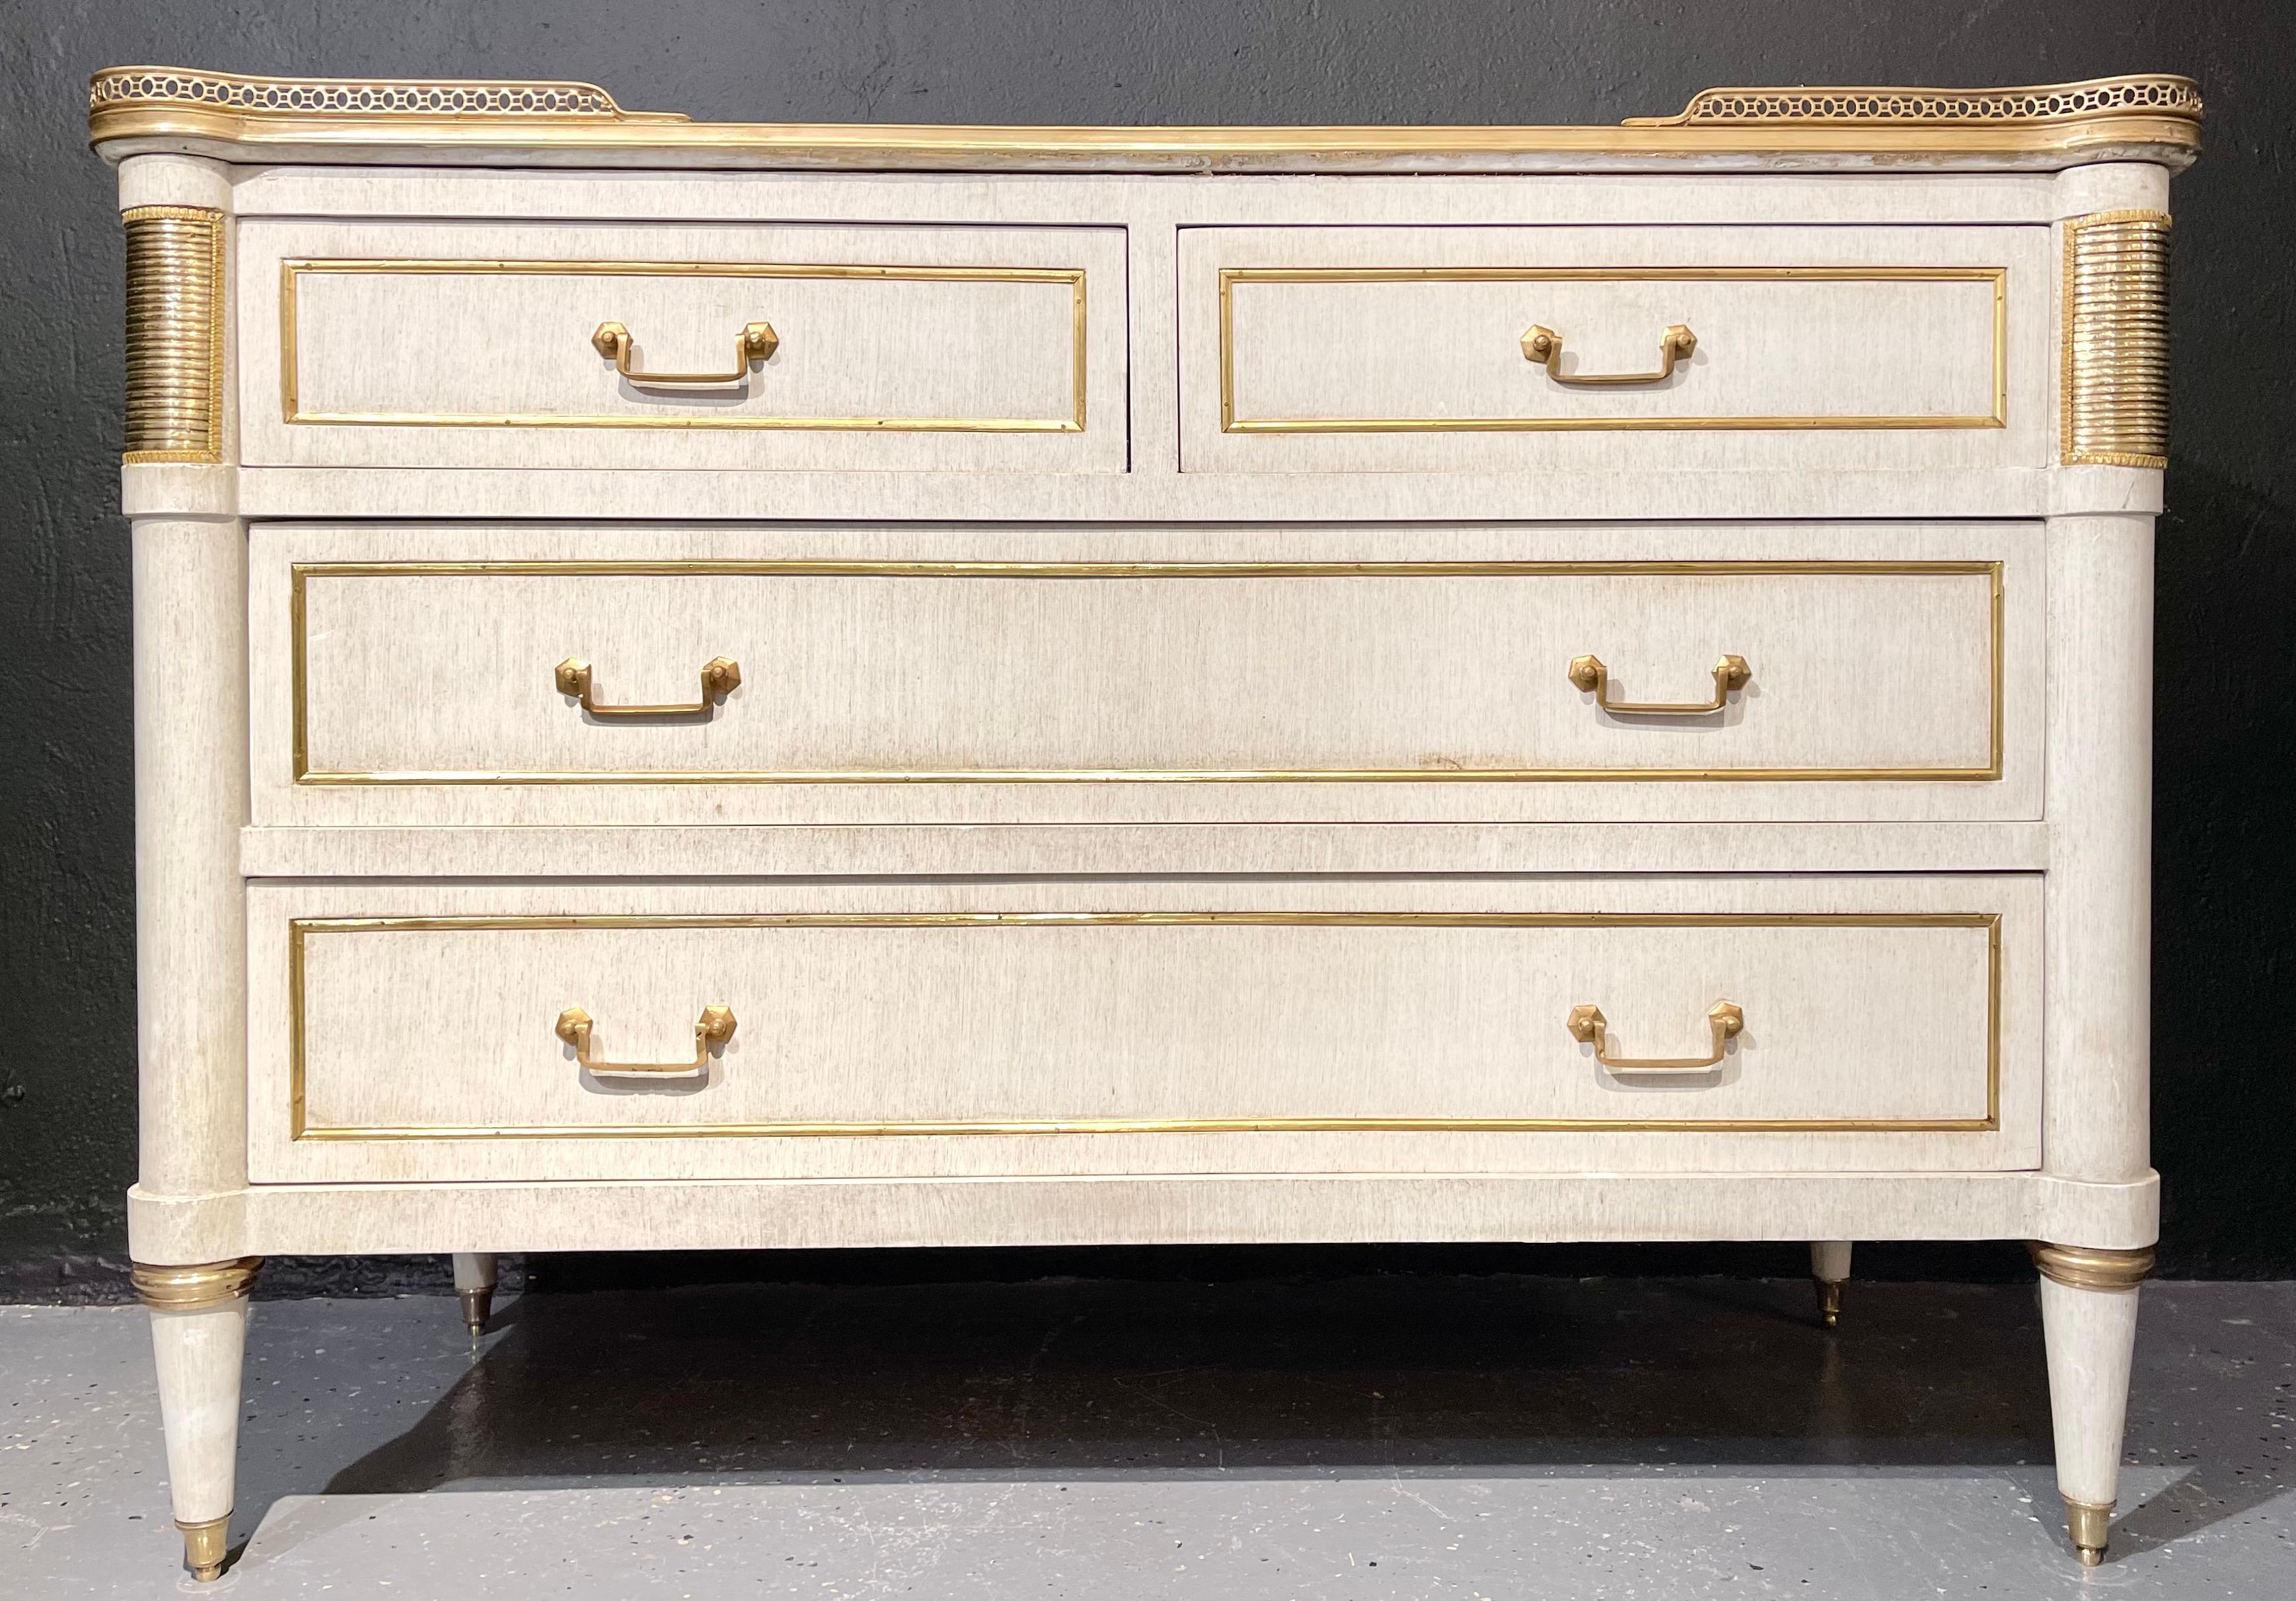 A pair of Jansen style marble top commodes or nightstands having a hand painted linen finish. A simply stunning and finely crafted pair of commodes or bedside stands in the Louis XVI style with a fine white and gray veined marble top set in a bronze